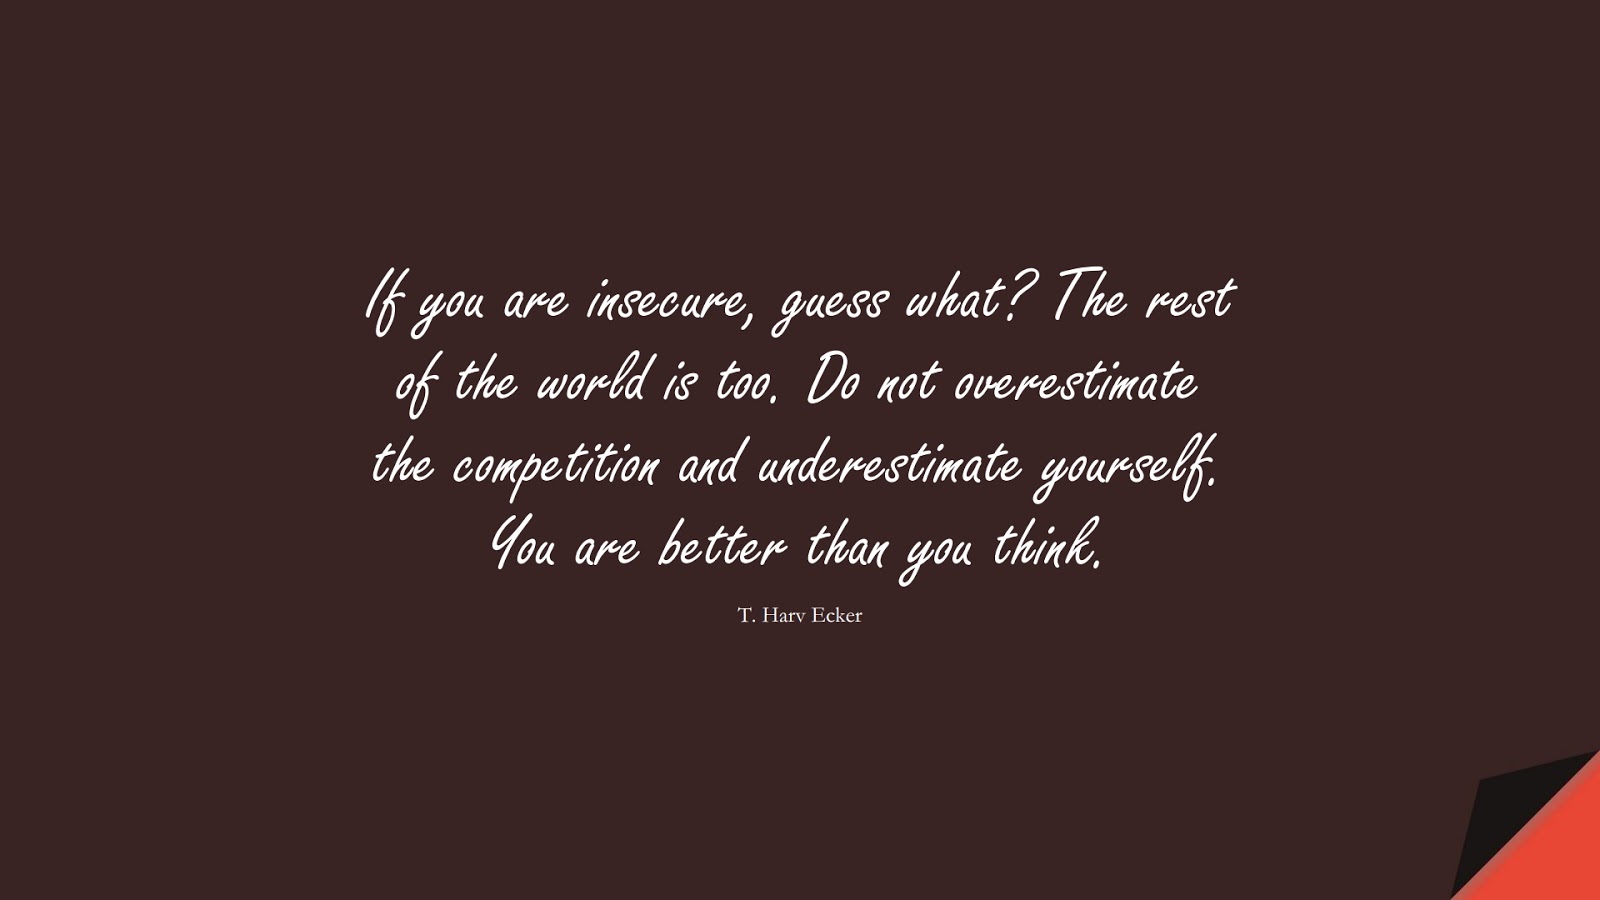 If you are insecure, guess what? The rest of the world is too. Do not overestimate the competition and underestimate yourself. You are better than you think. (T. Harv Ecker);  #SelfEsteemQuotes